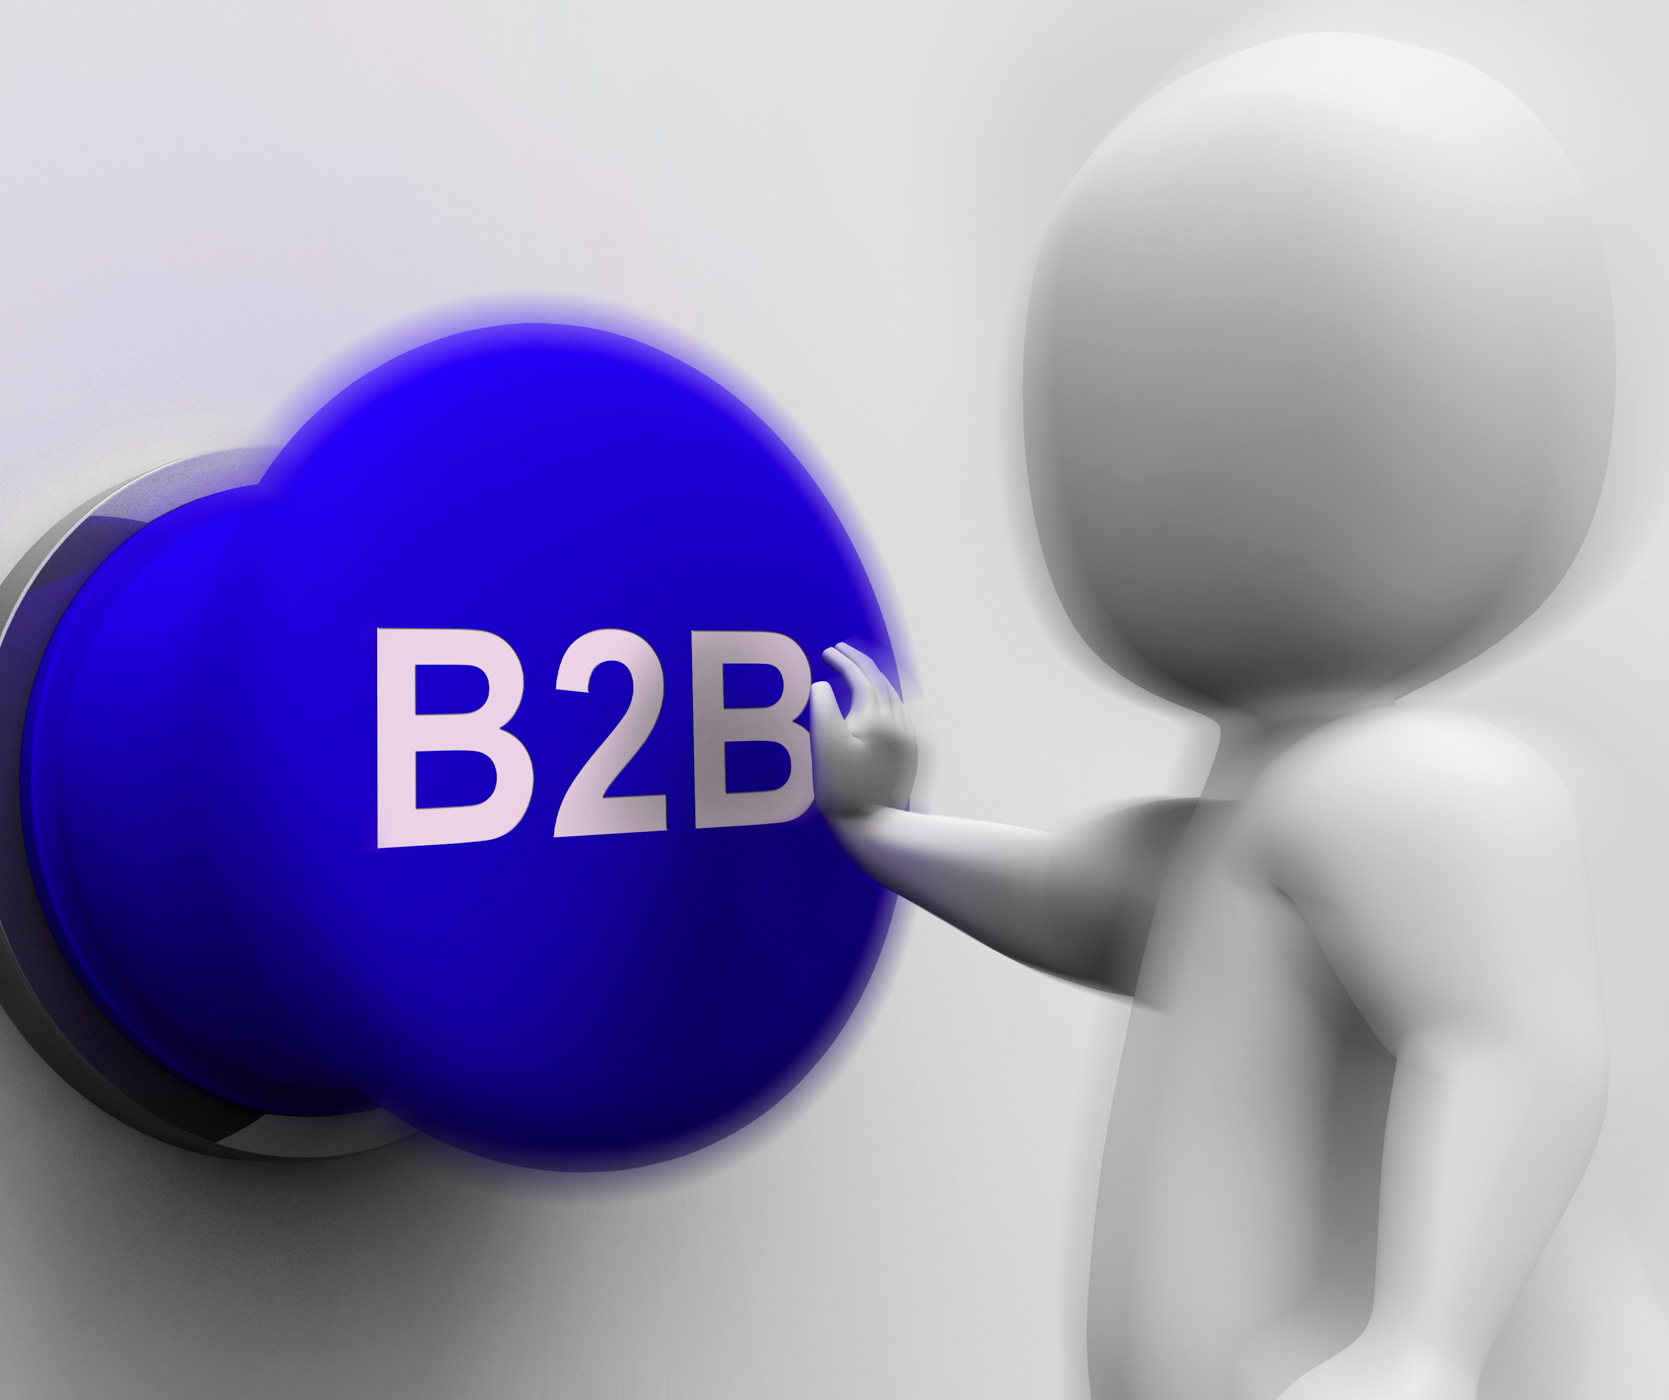 B2b pressed shows corporate partnership and relations photo